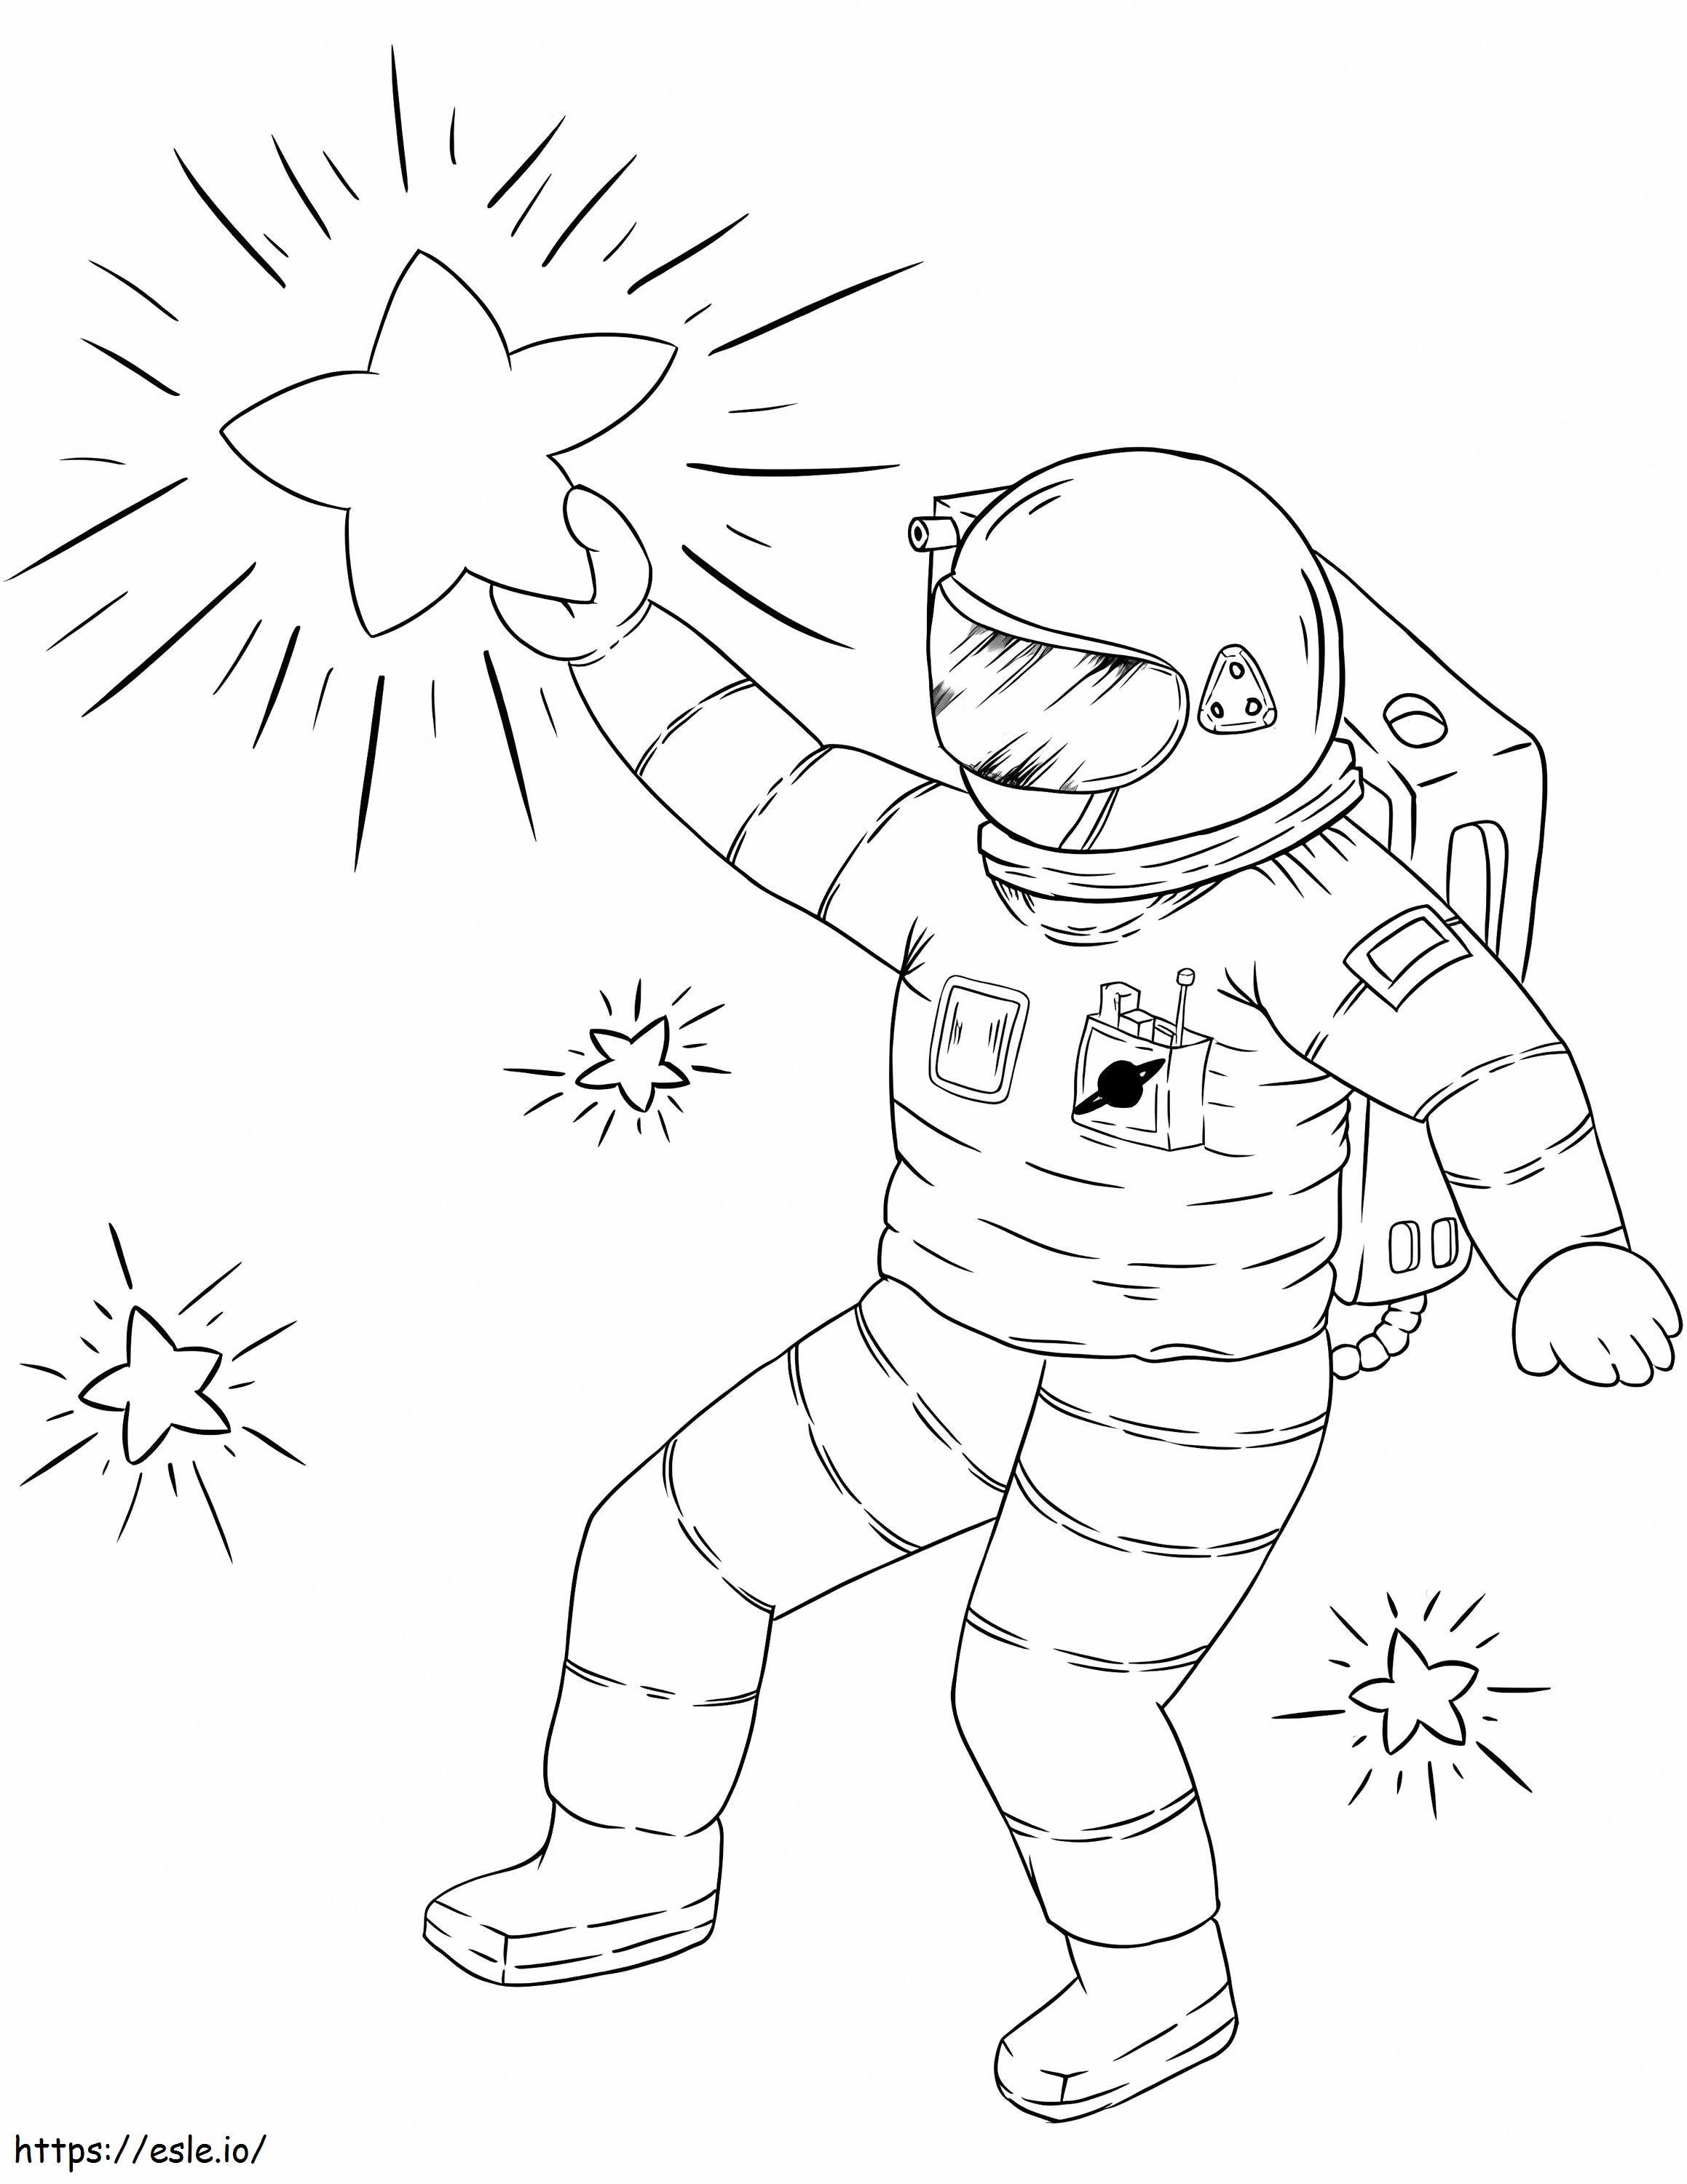 Astronaut And Stars coloring page